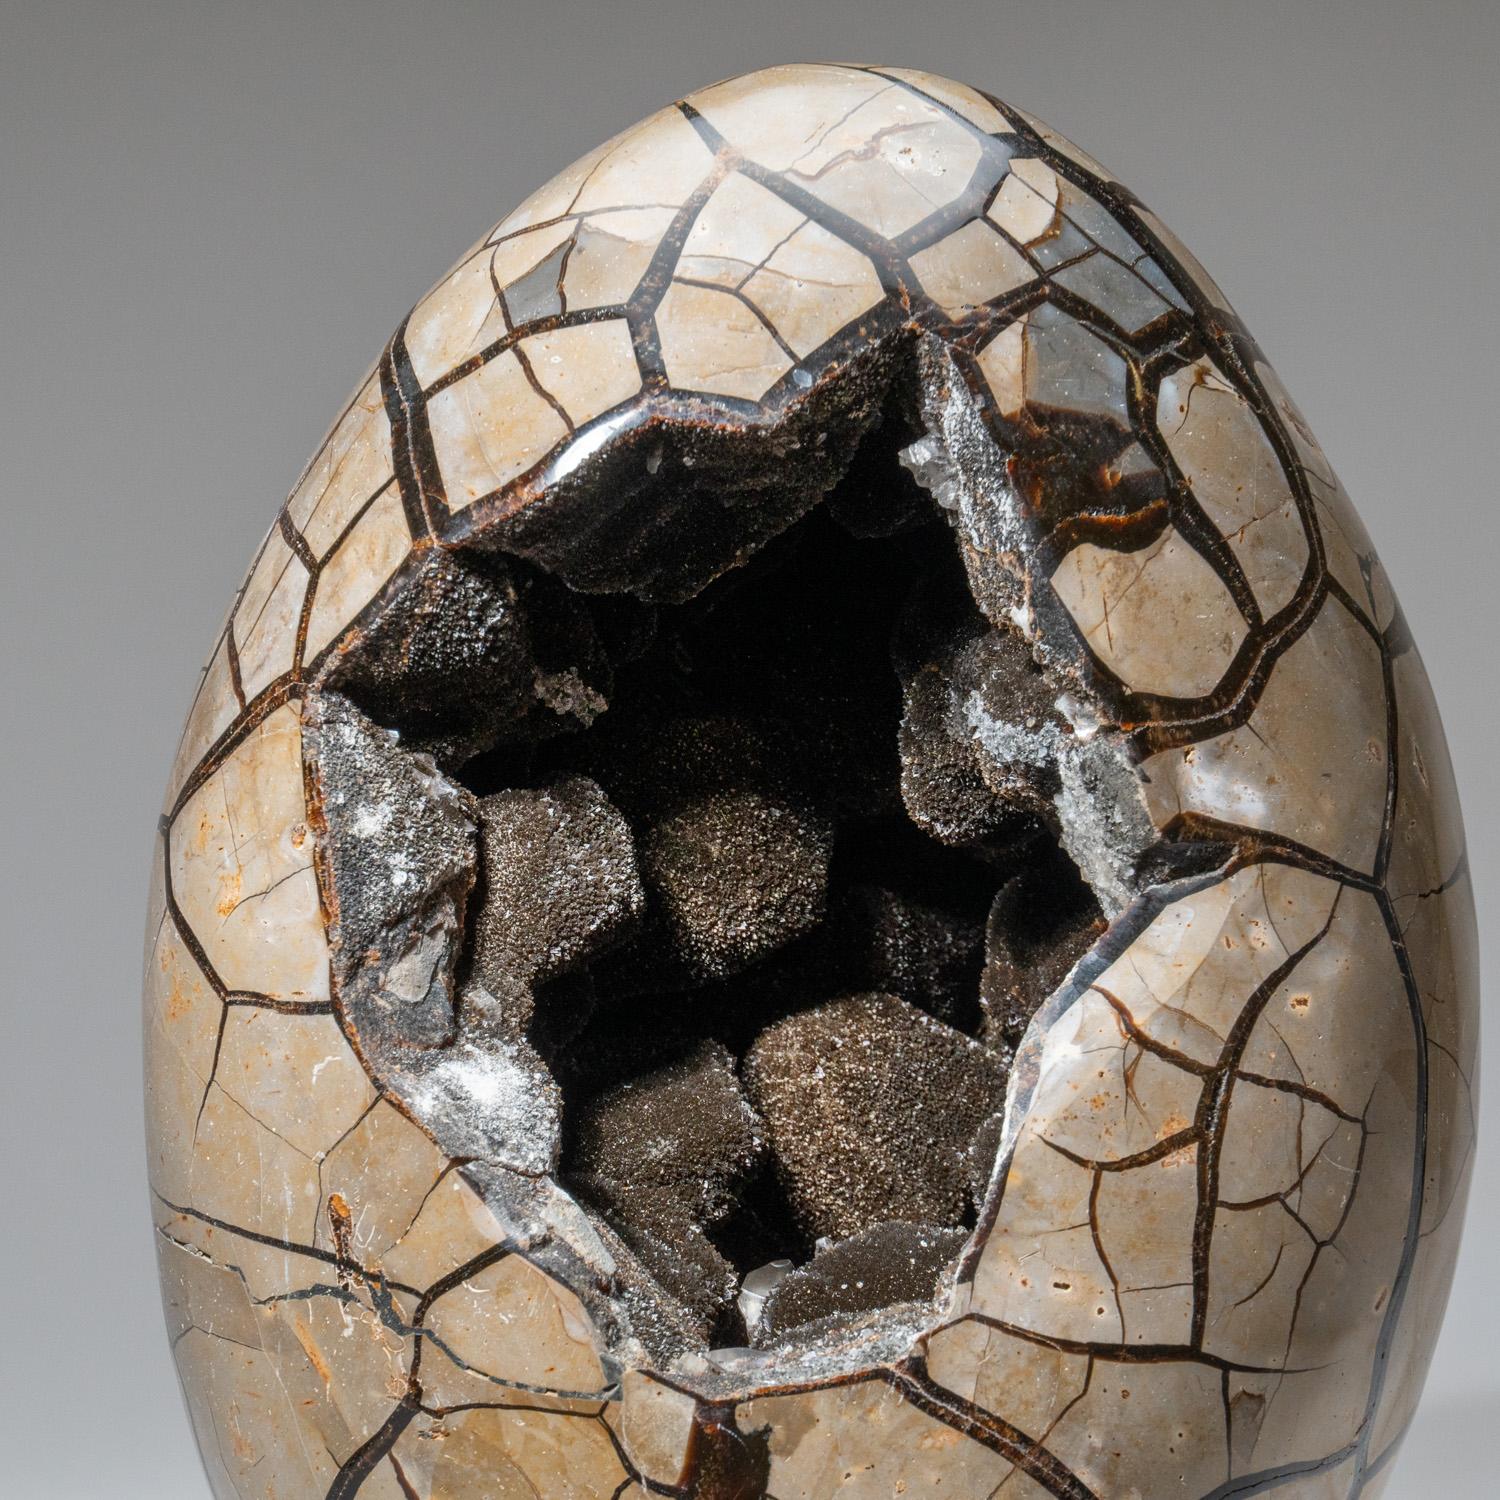 Malagasy Polished Septarian Druzy Geode Egg from Madagascar (44.5 lbs) For Sale